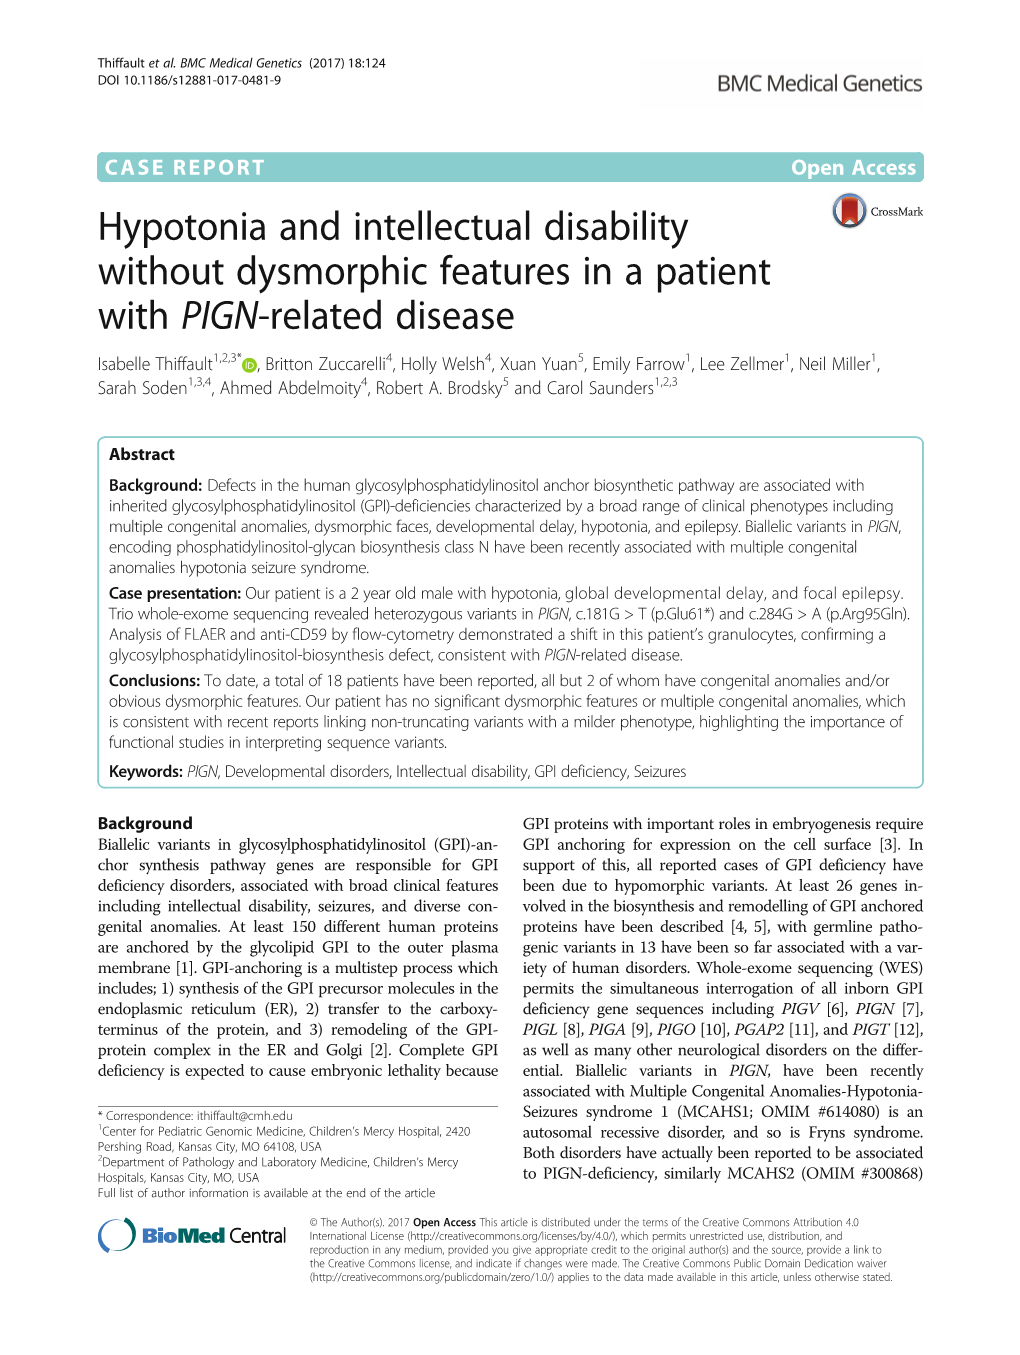 Hypotonia and Intellectual Disability Without Dysmorphic Features in A